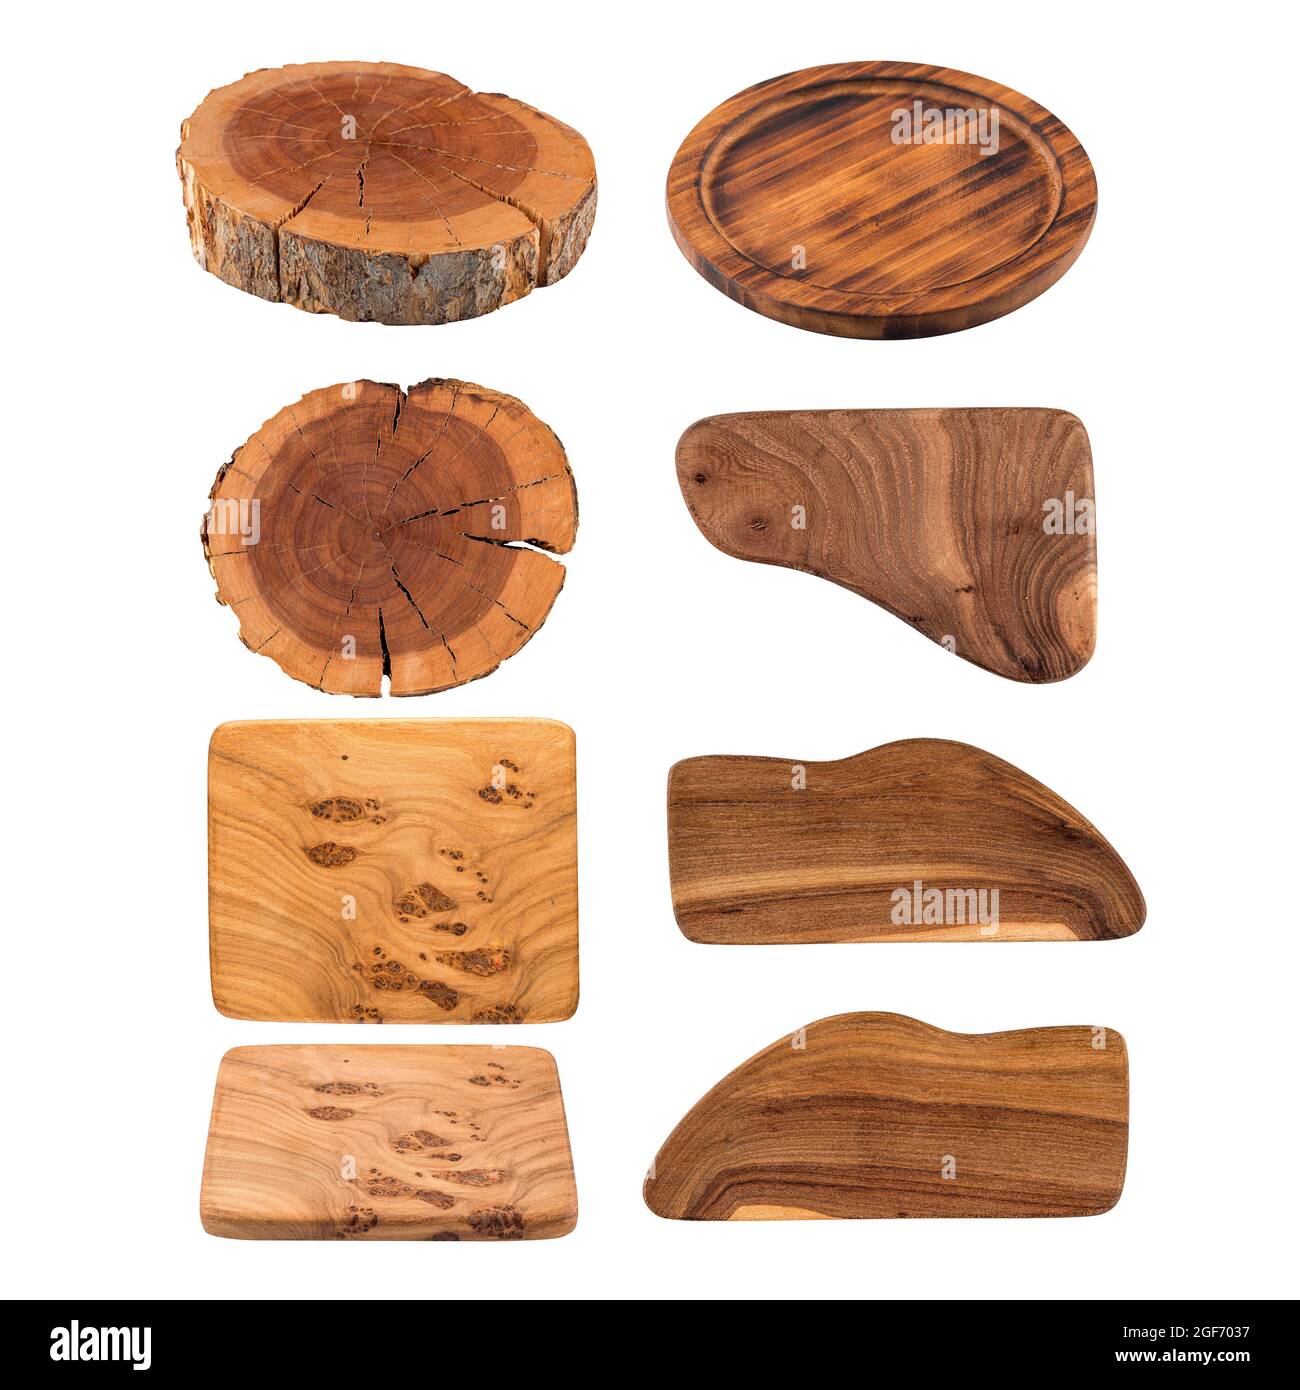 https://c8.alamy.com/comp/2GF7037/isolated-wooden-chopping-boards-collage-set-2GF7037.jpg